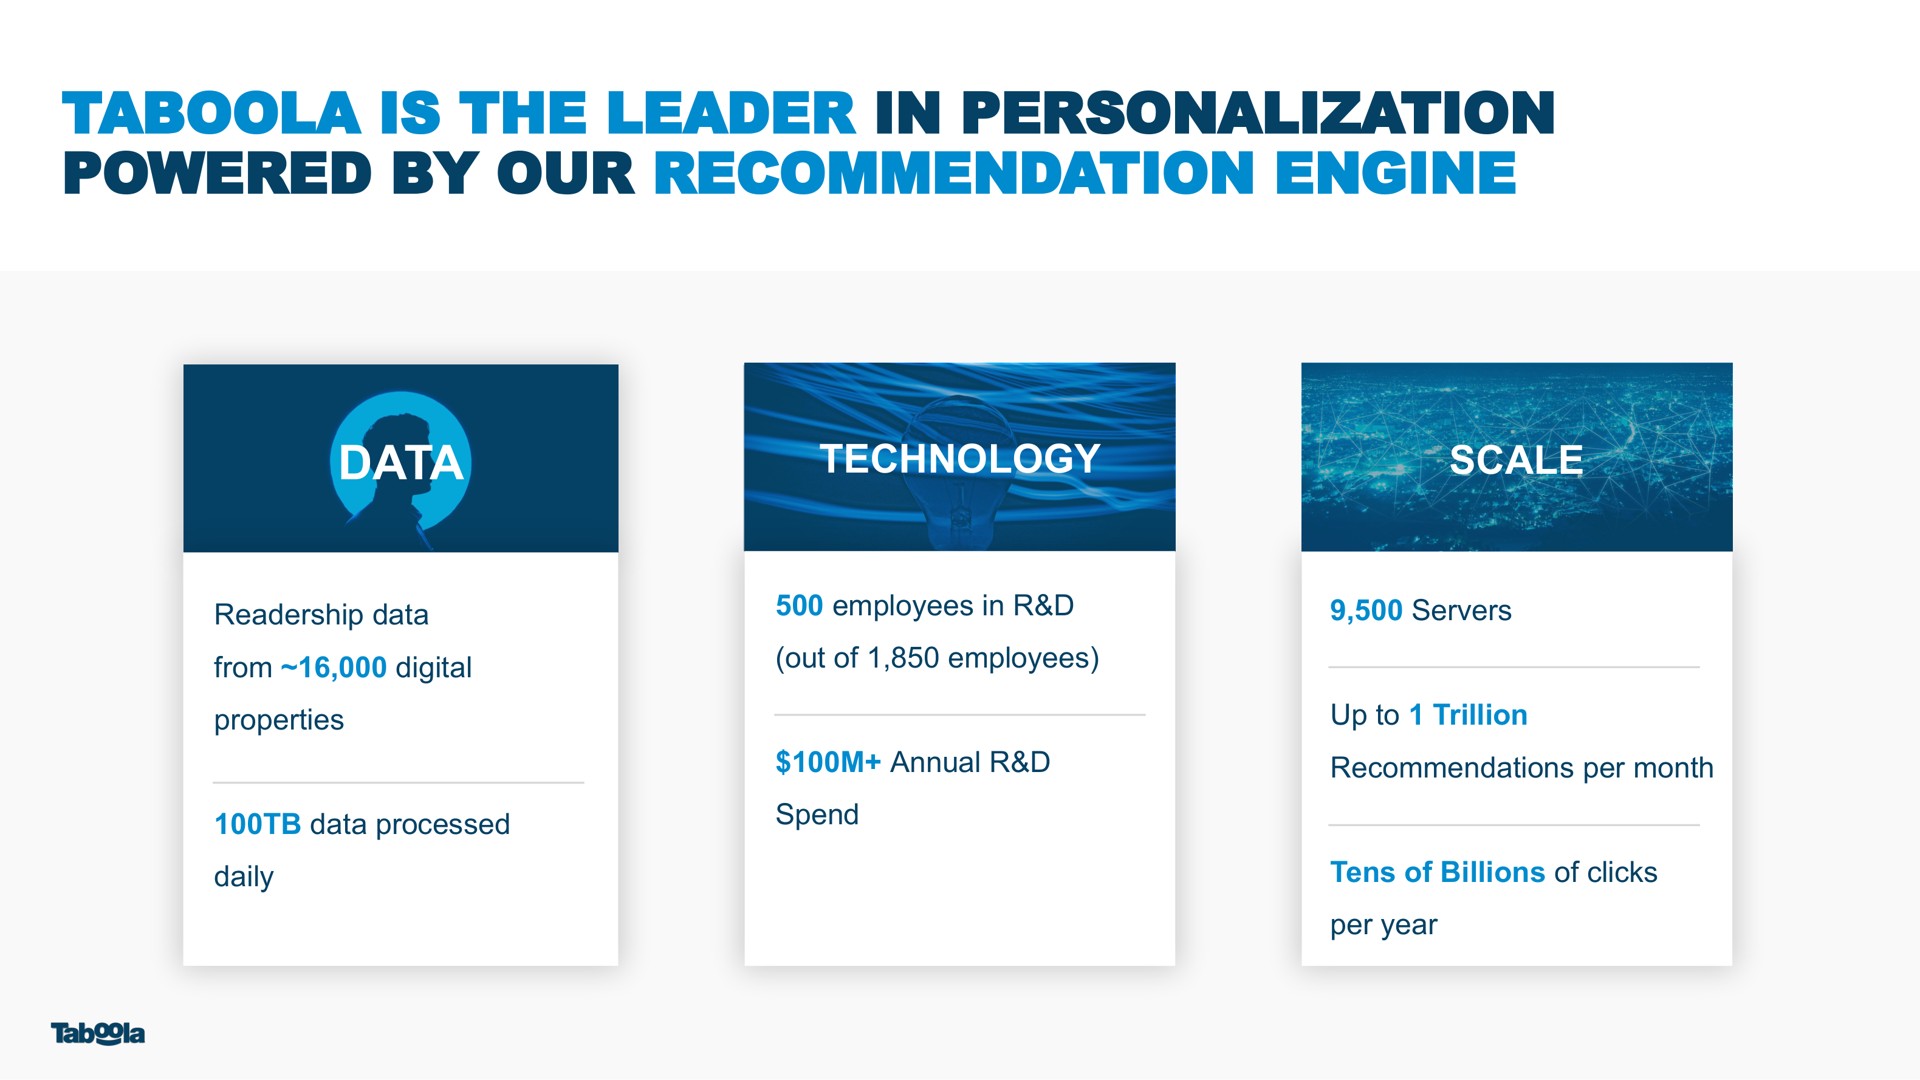 is the leader in personalization powered by our recommendation engine | Taboola